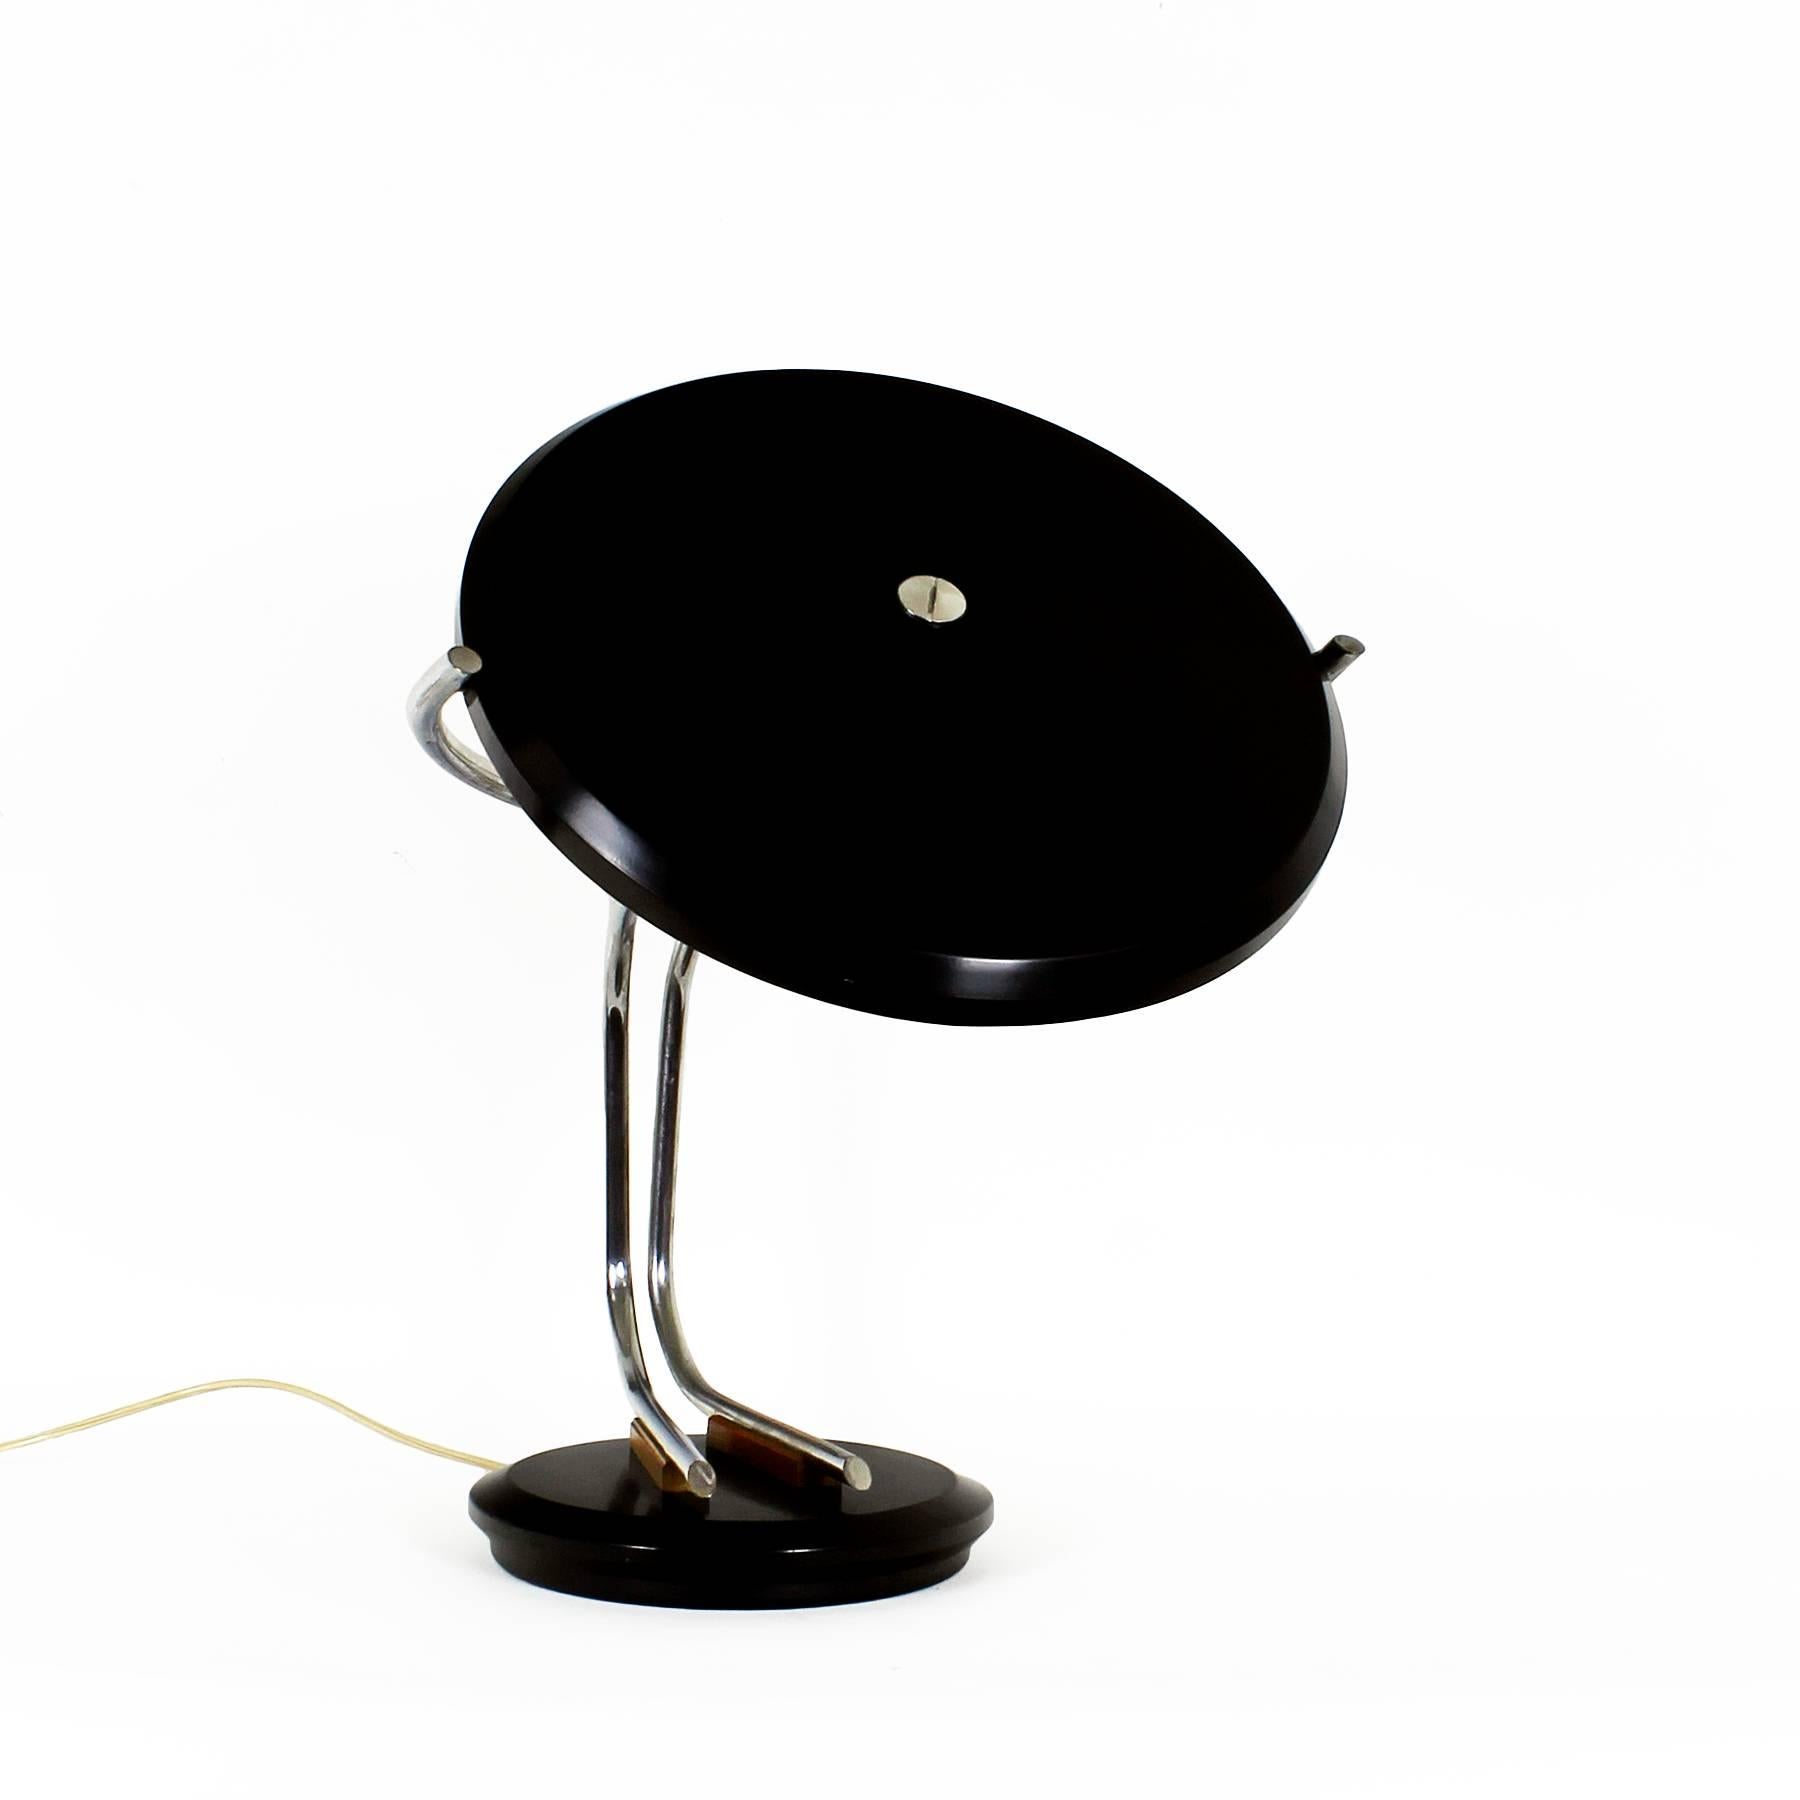 Lacquered Mid-Century Modern Chrome-Plated Metal Desk Lamp by Fase - Spain For Sale